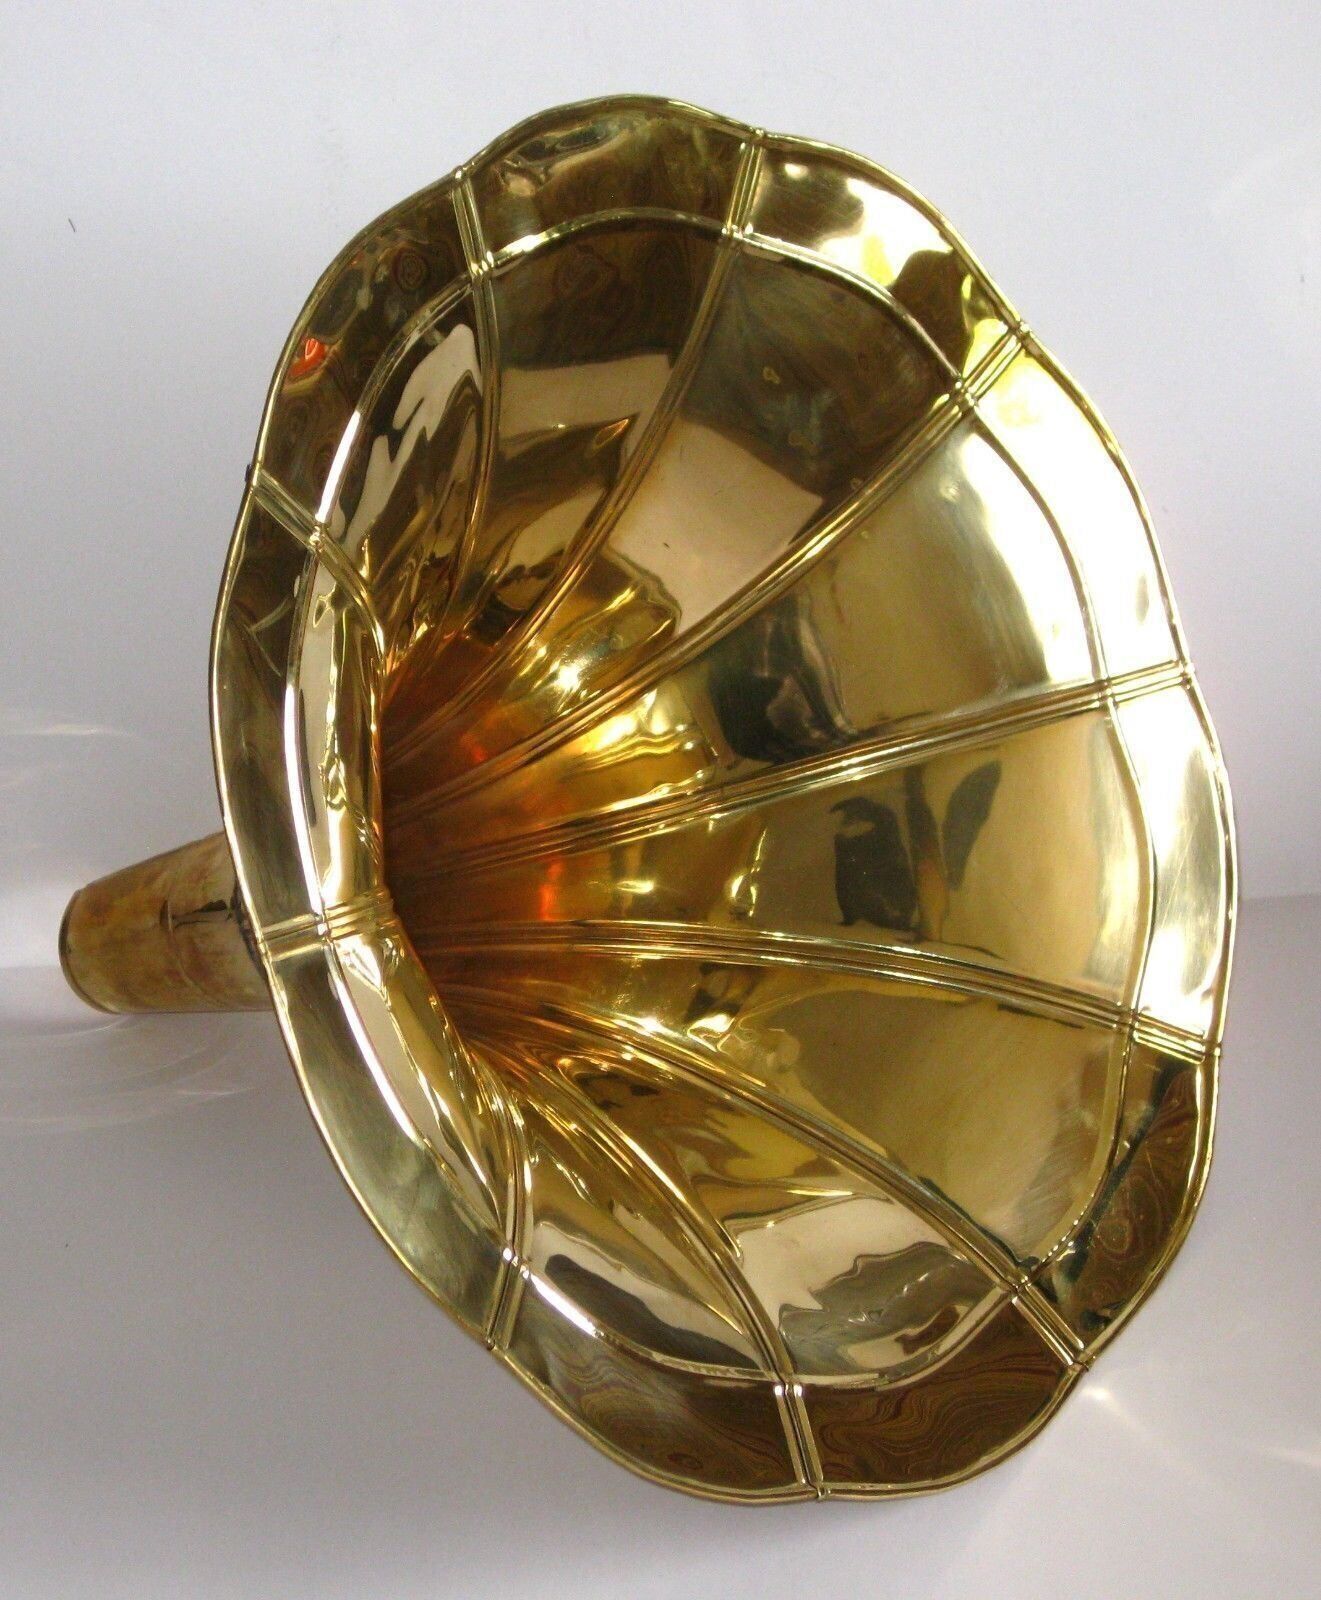 Gramophone Brass Horn Full Size Collectable Ornament Retro Reproduction